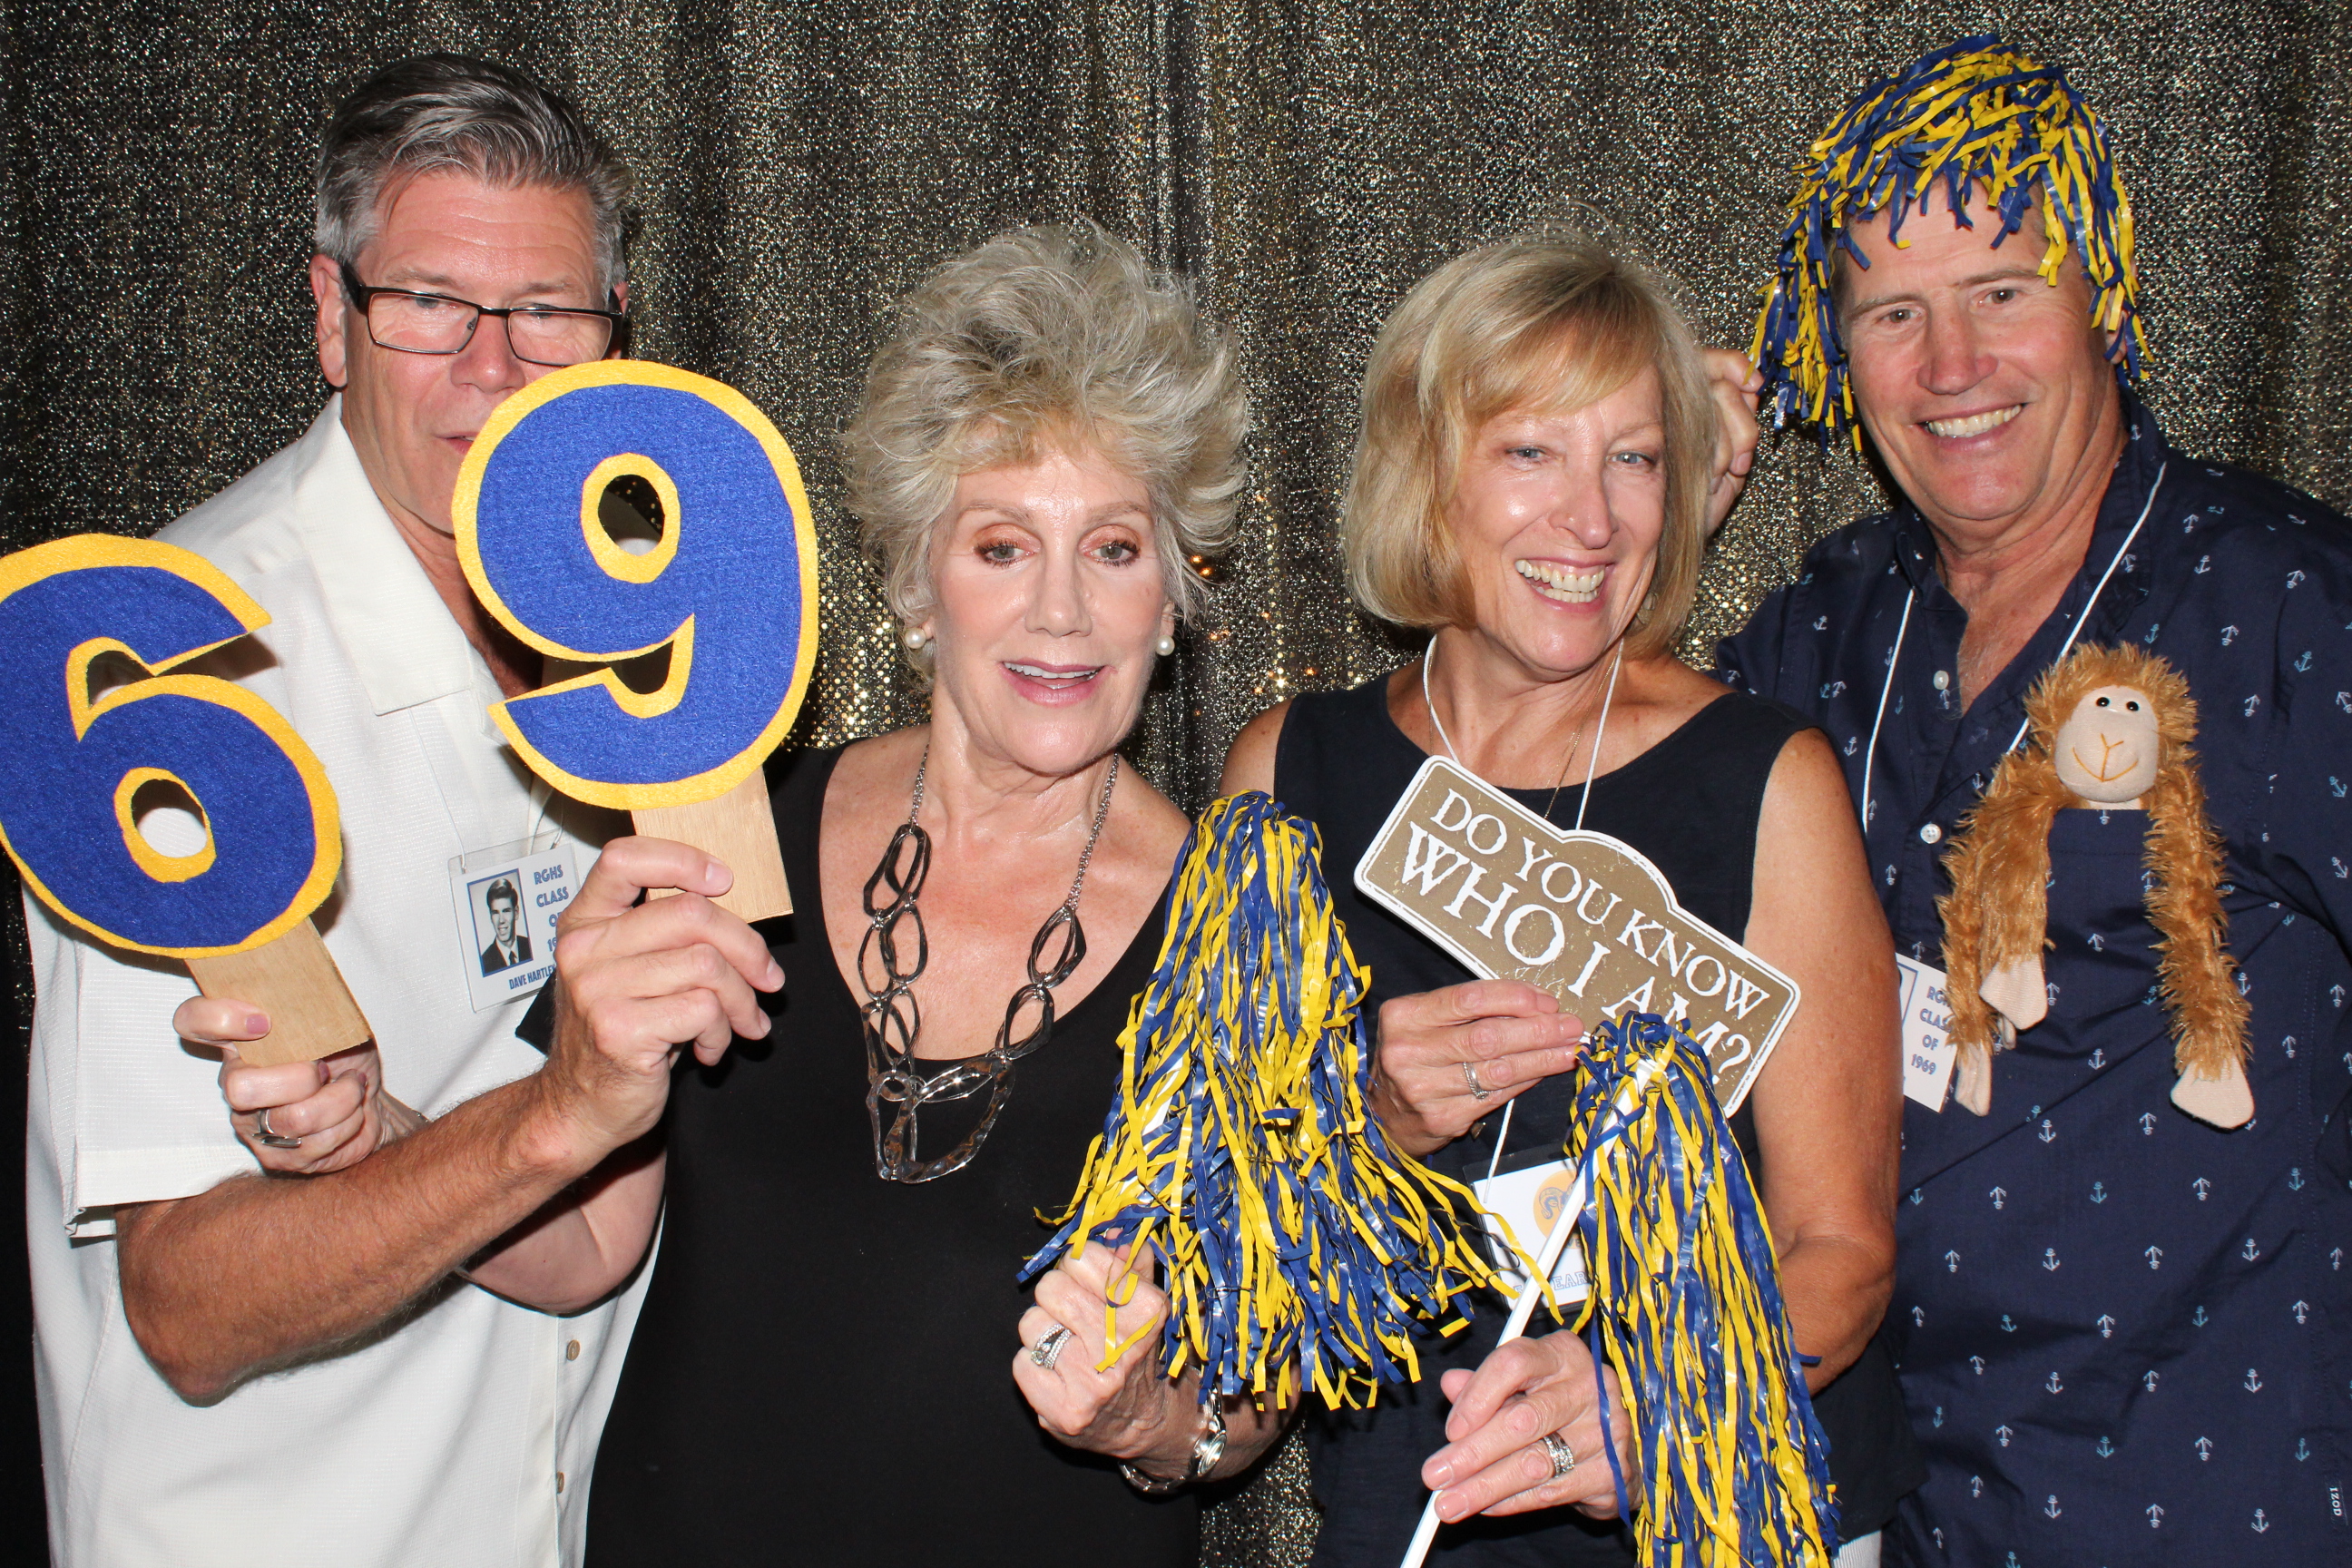 PHOTO BOOTH: Dave Hartley and Denise Lassalle and Kathy and Ken DeBeer